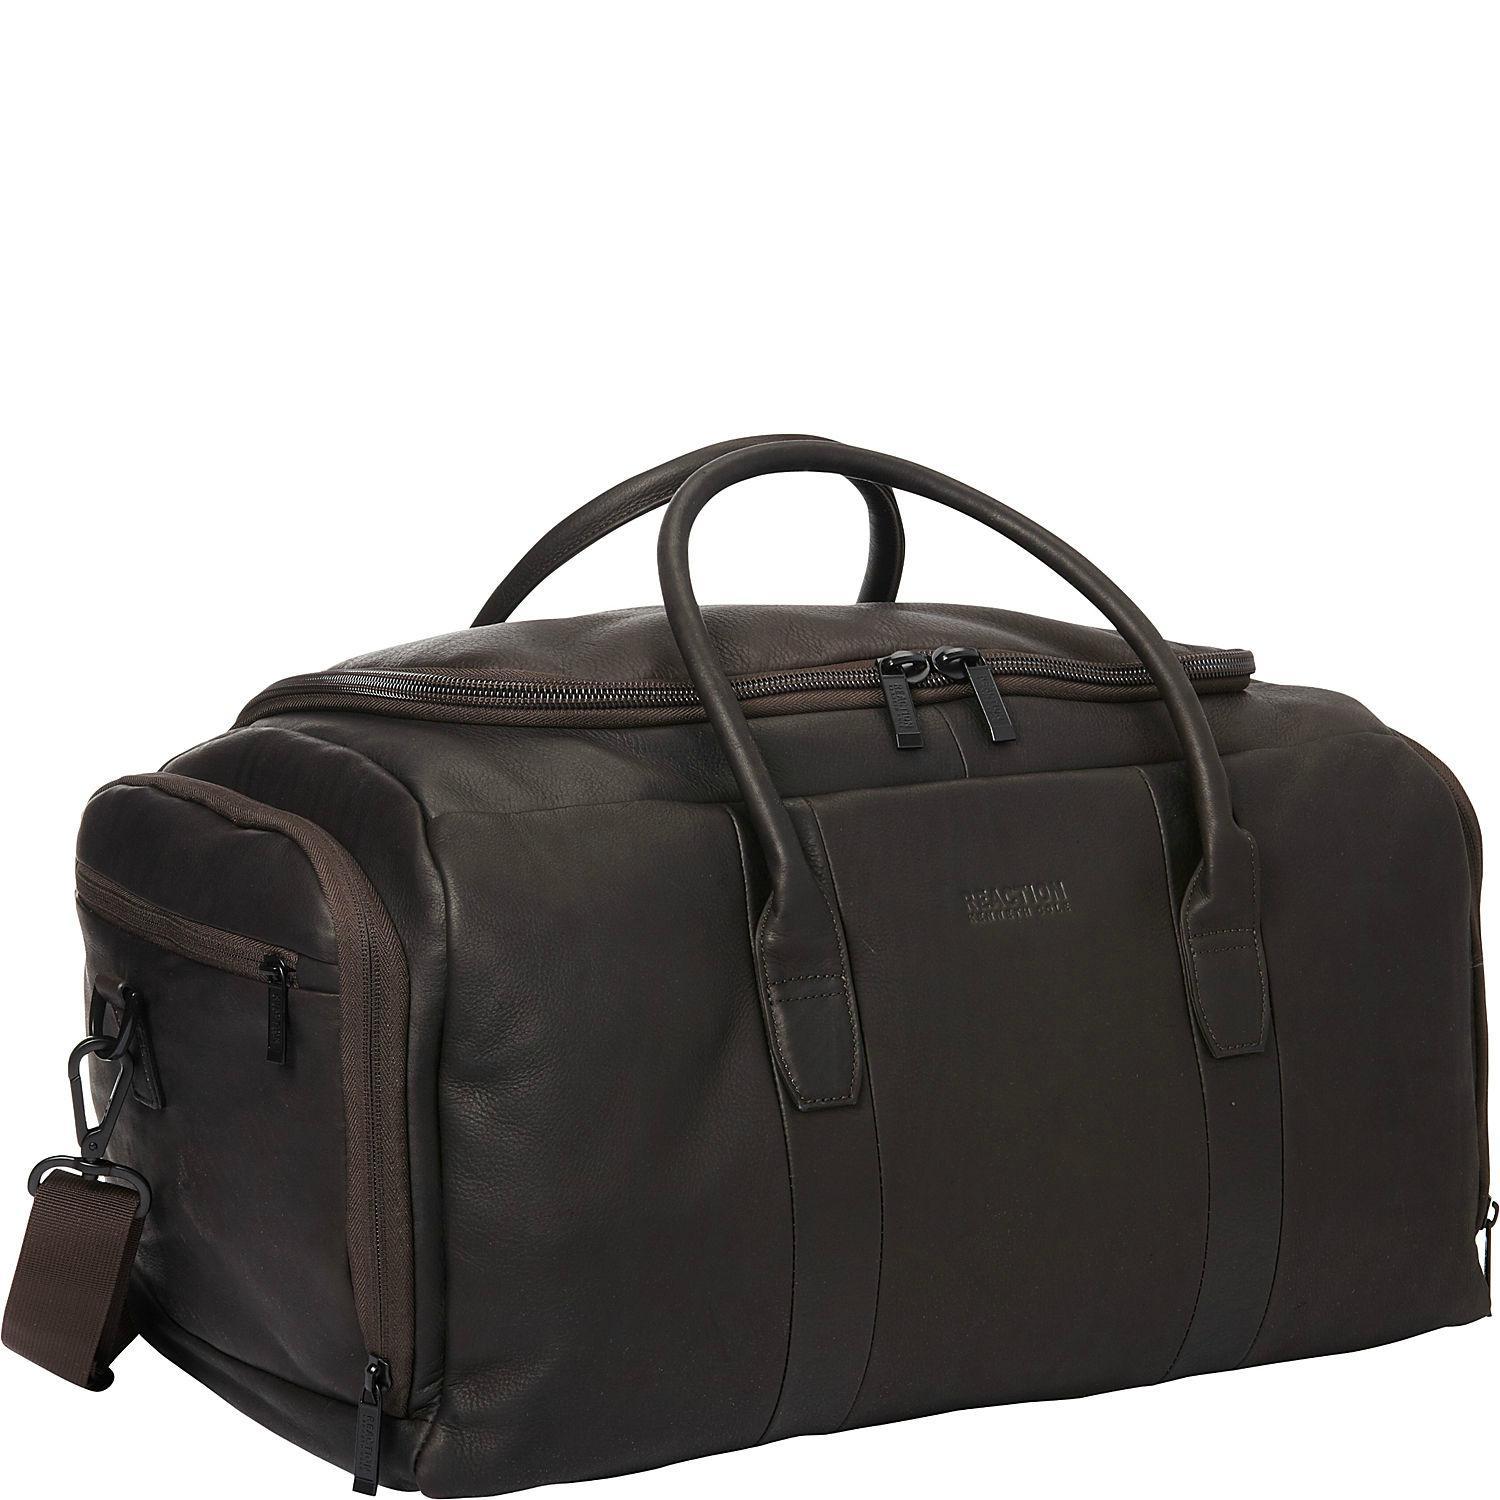 Kenneth Cole Reaction "Quit the Funny Duff" 20"Duffel Bag – Luggage Pros